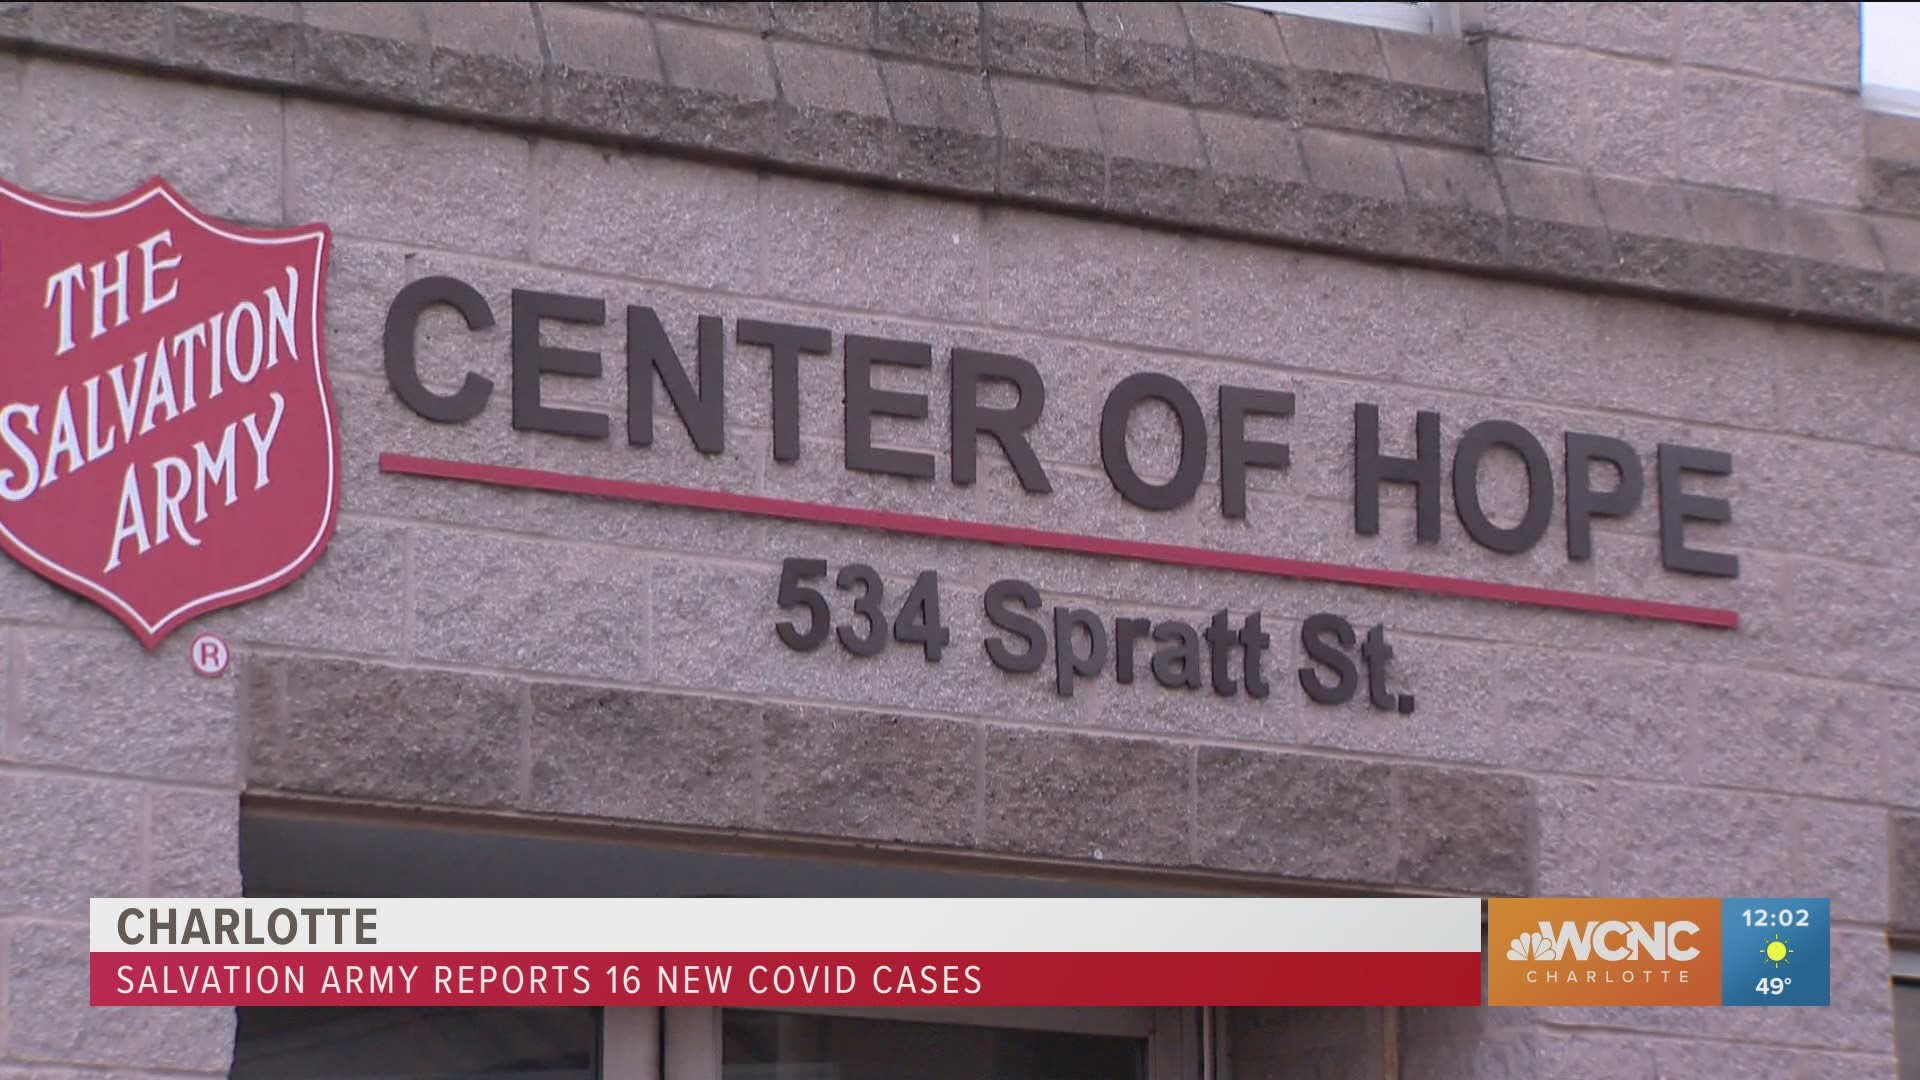 Officials announced 16 new COVID-19 cases at Charlotte's Salvation Army Center of Hope, bringing the total number to 36.